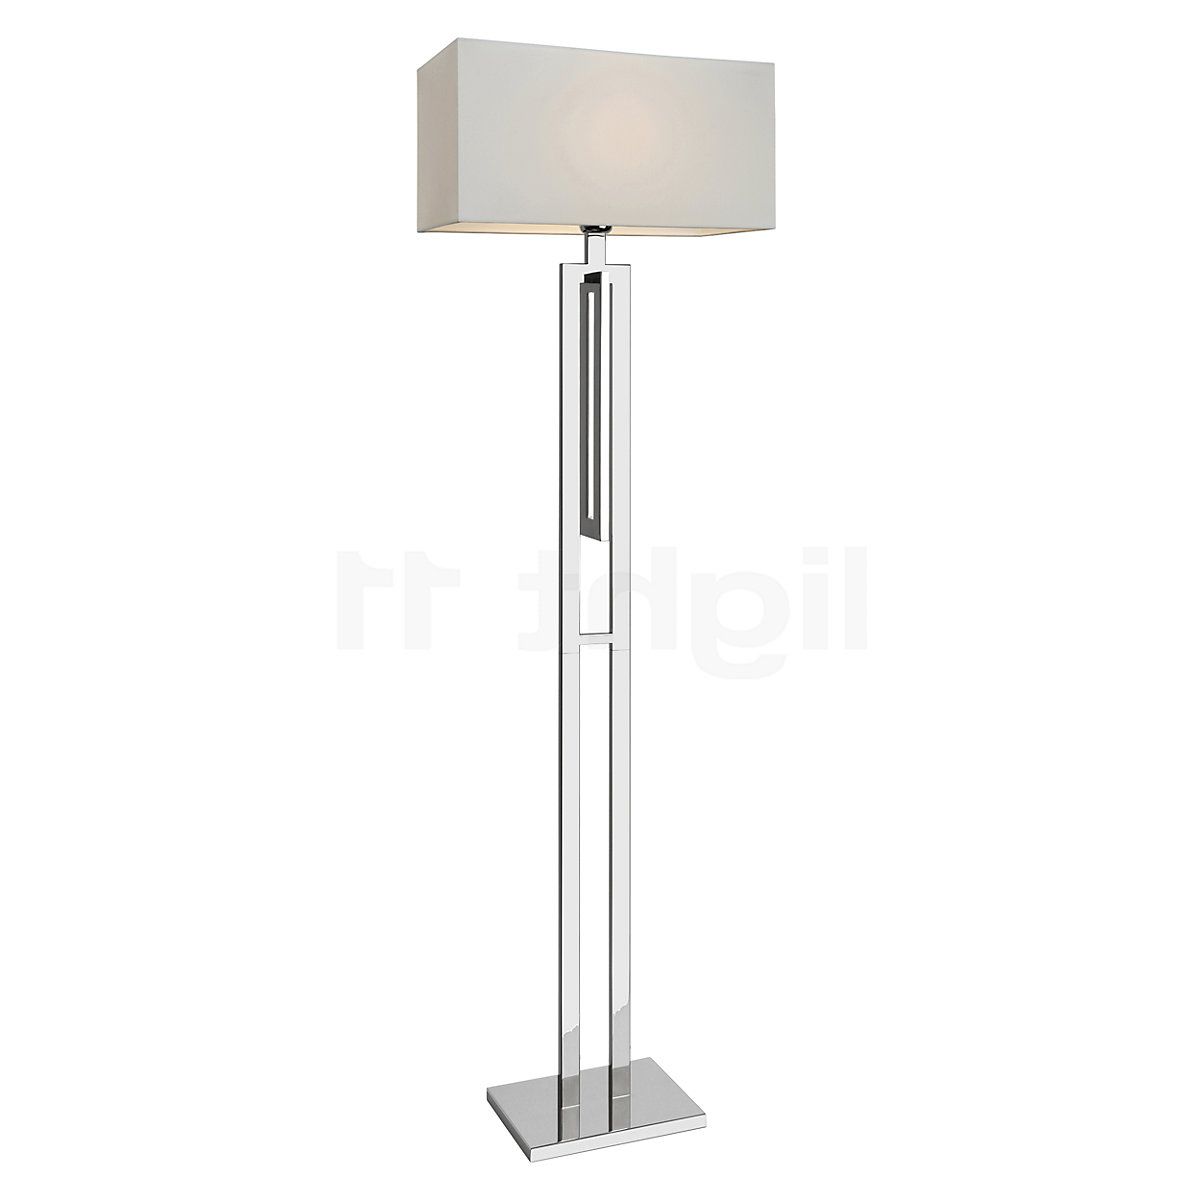 Buy Sompex City Floor Lamp At Light (View 2 of 15)